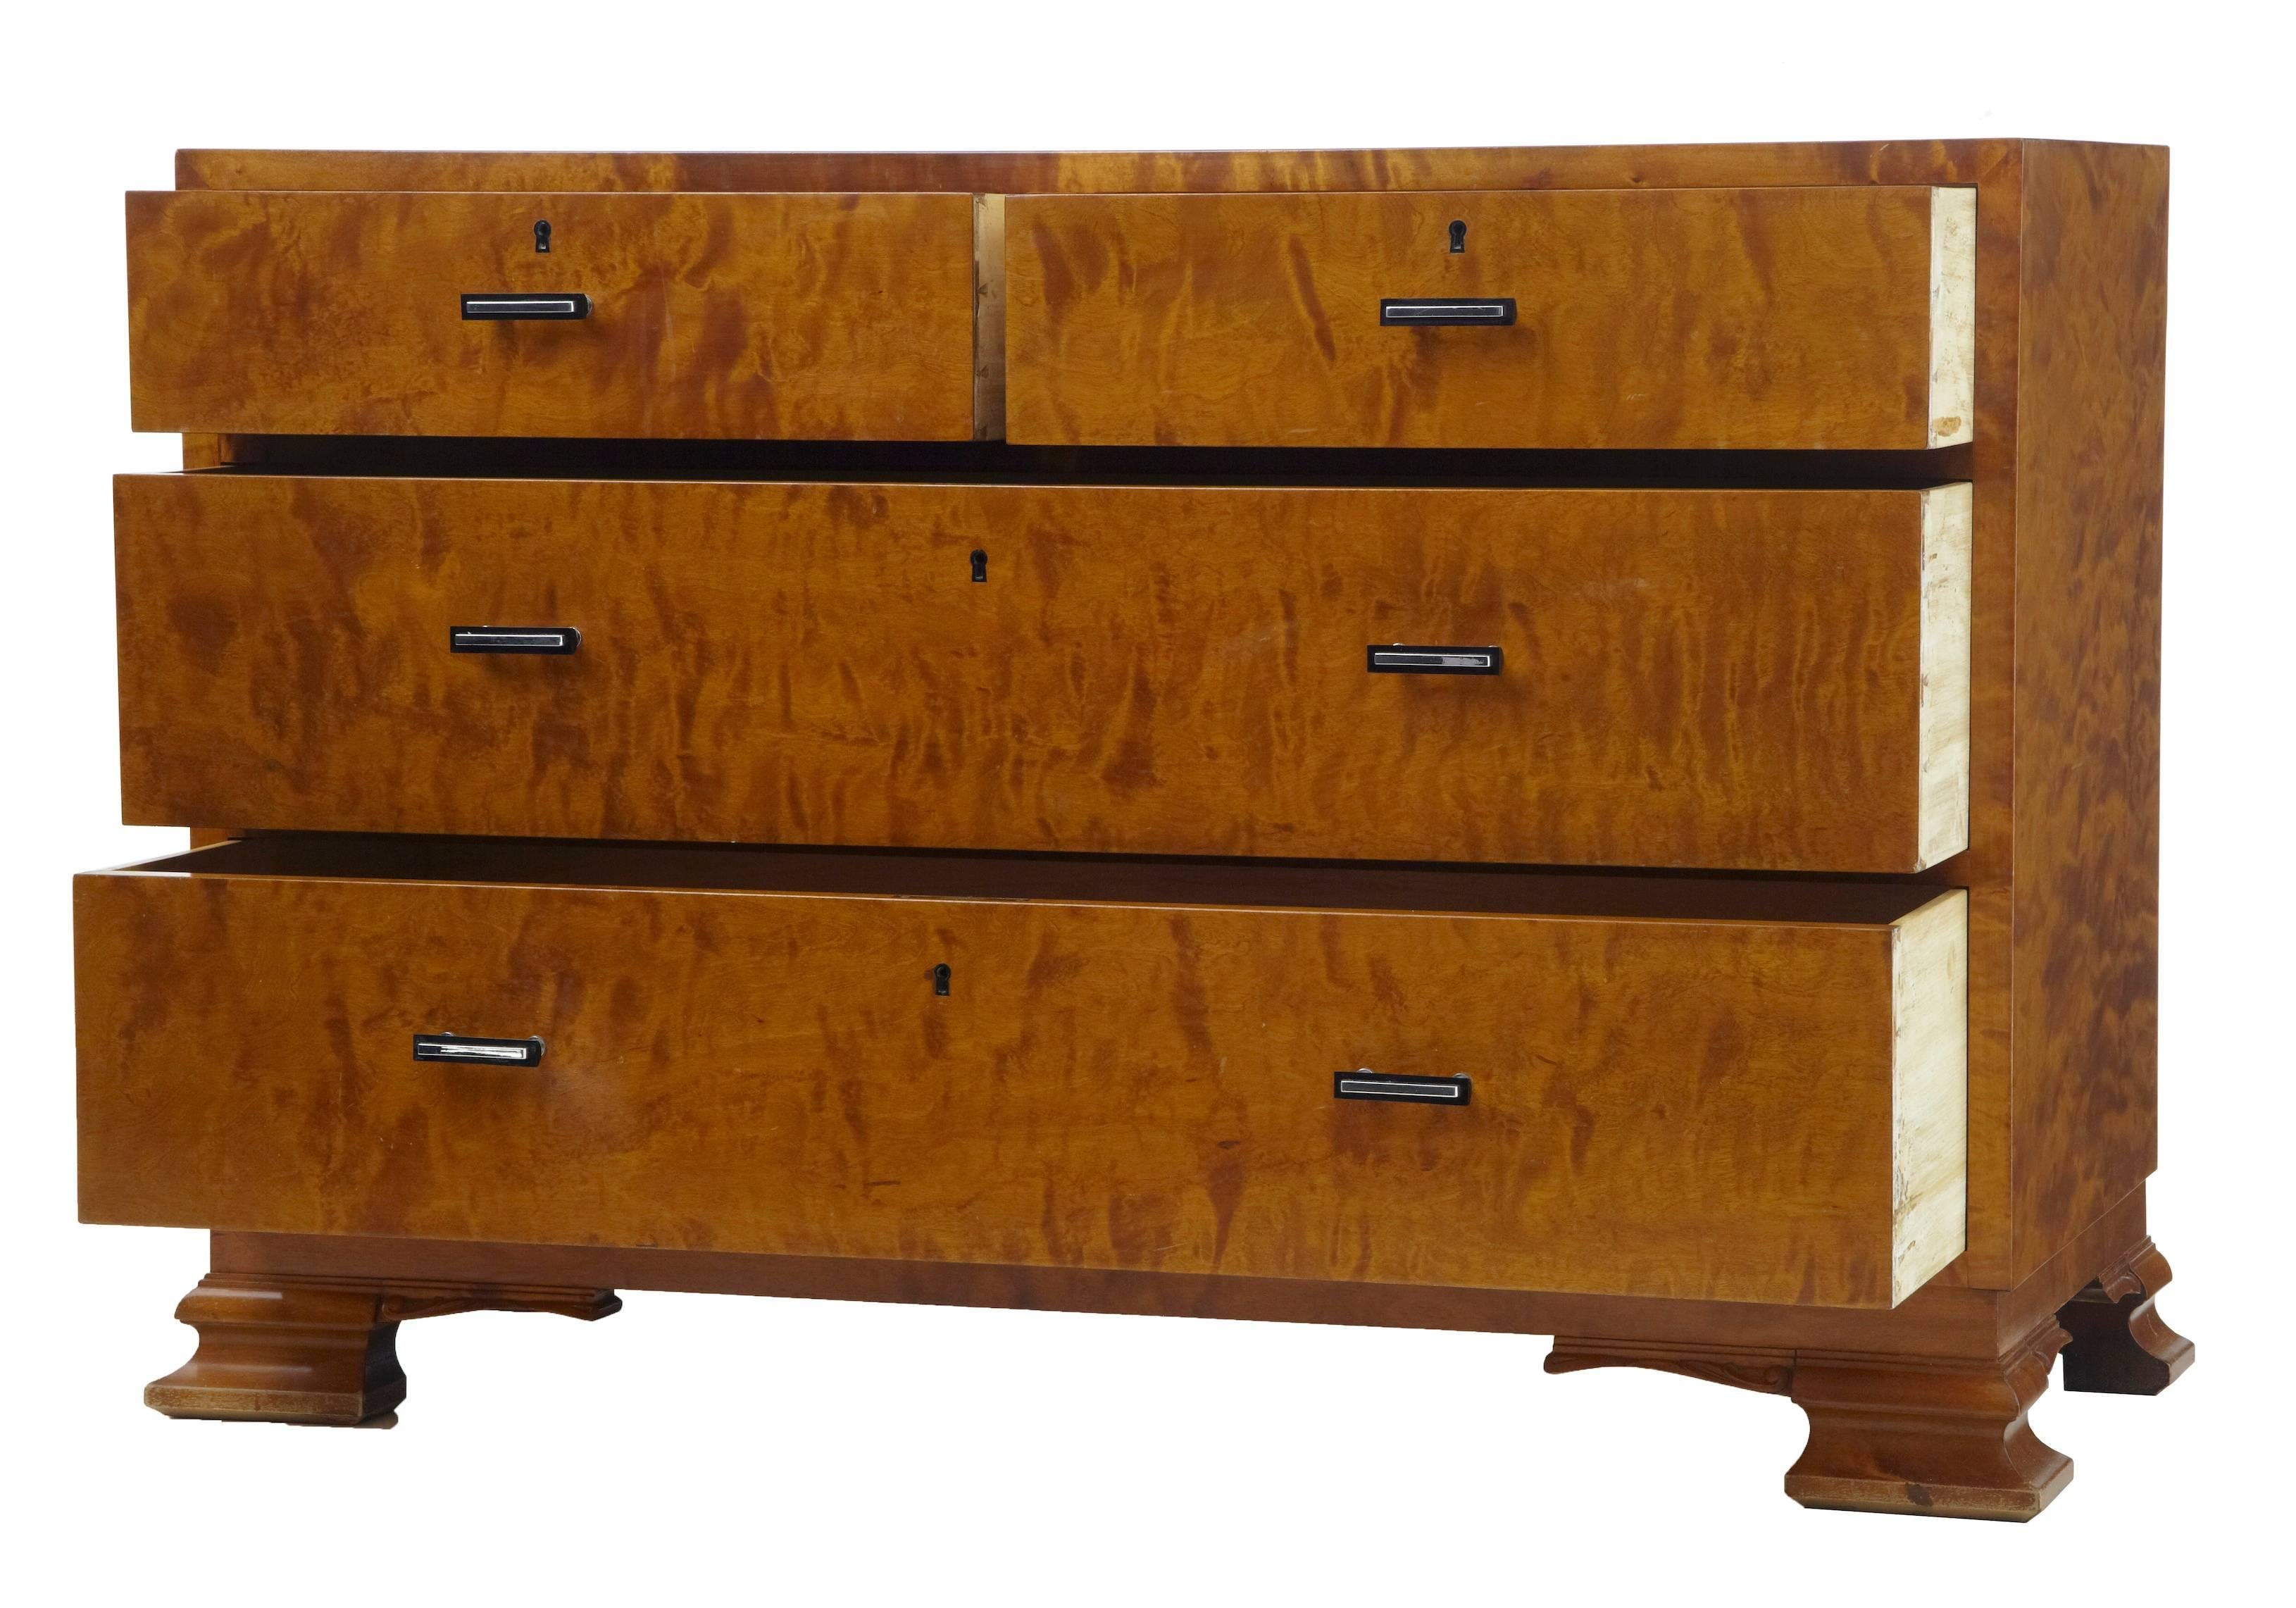 Good quality later deco birch chest of drawers, circa 1950.
Three-drawer chest with rich color and patina.
Standing on ogee bracket feet.

Height: 29 1/2